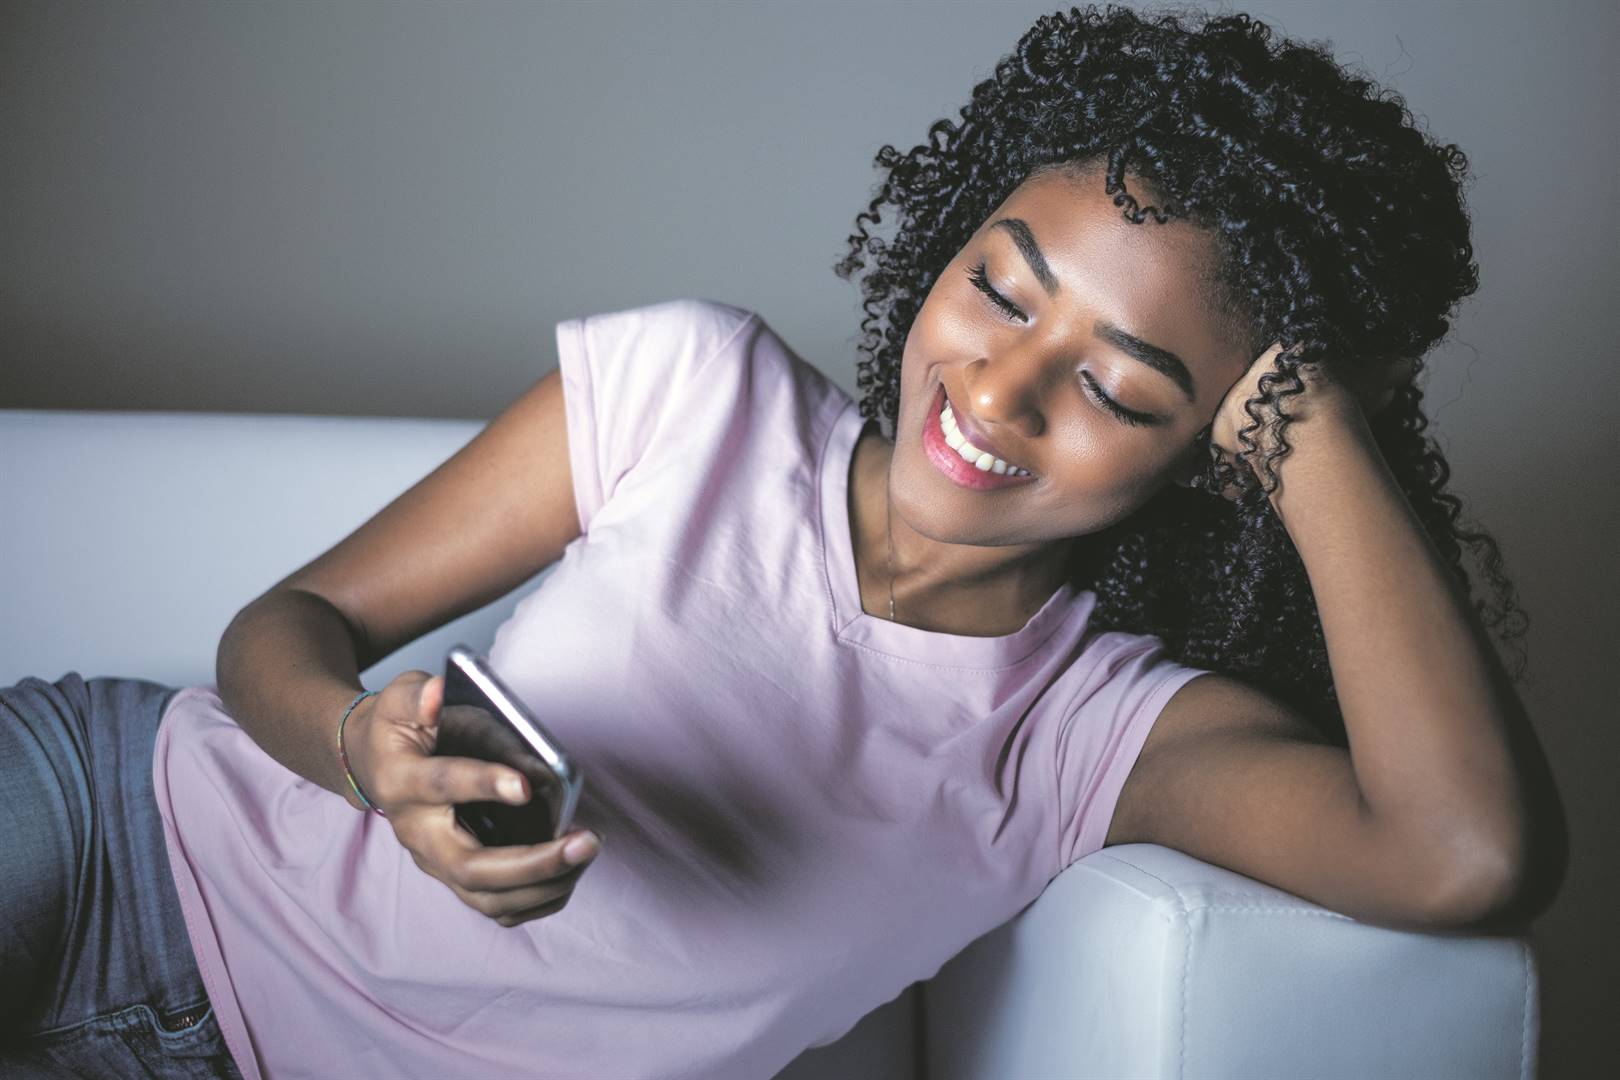 Umjolo hosts share some tips on how one can be safe while exploring online dating.